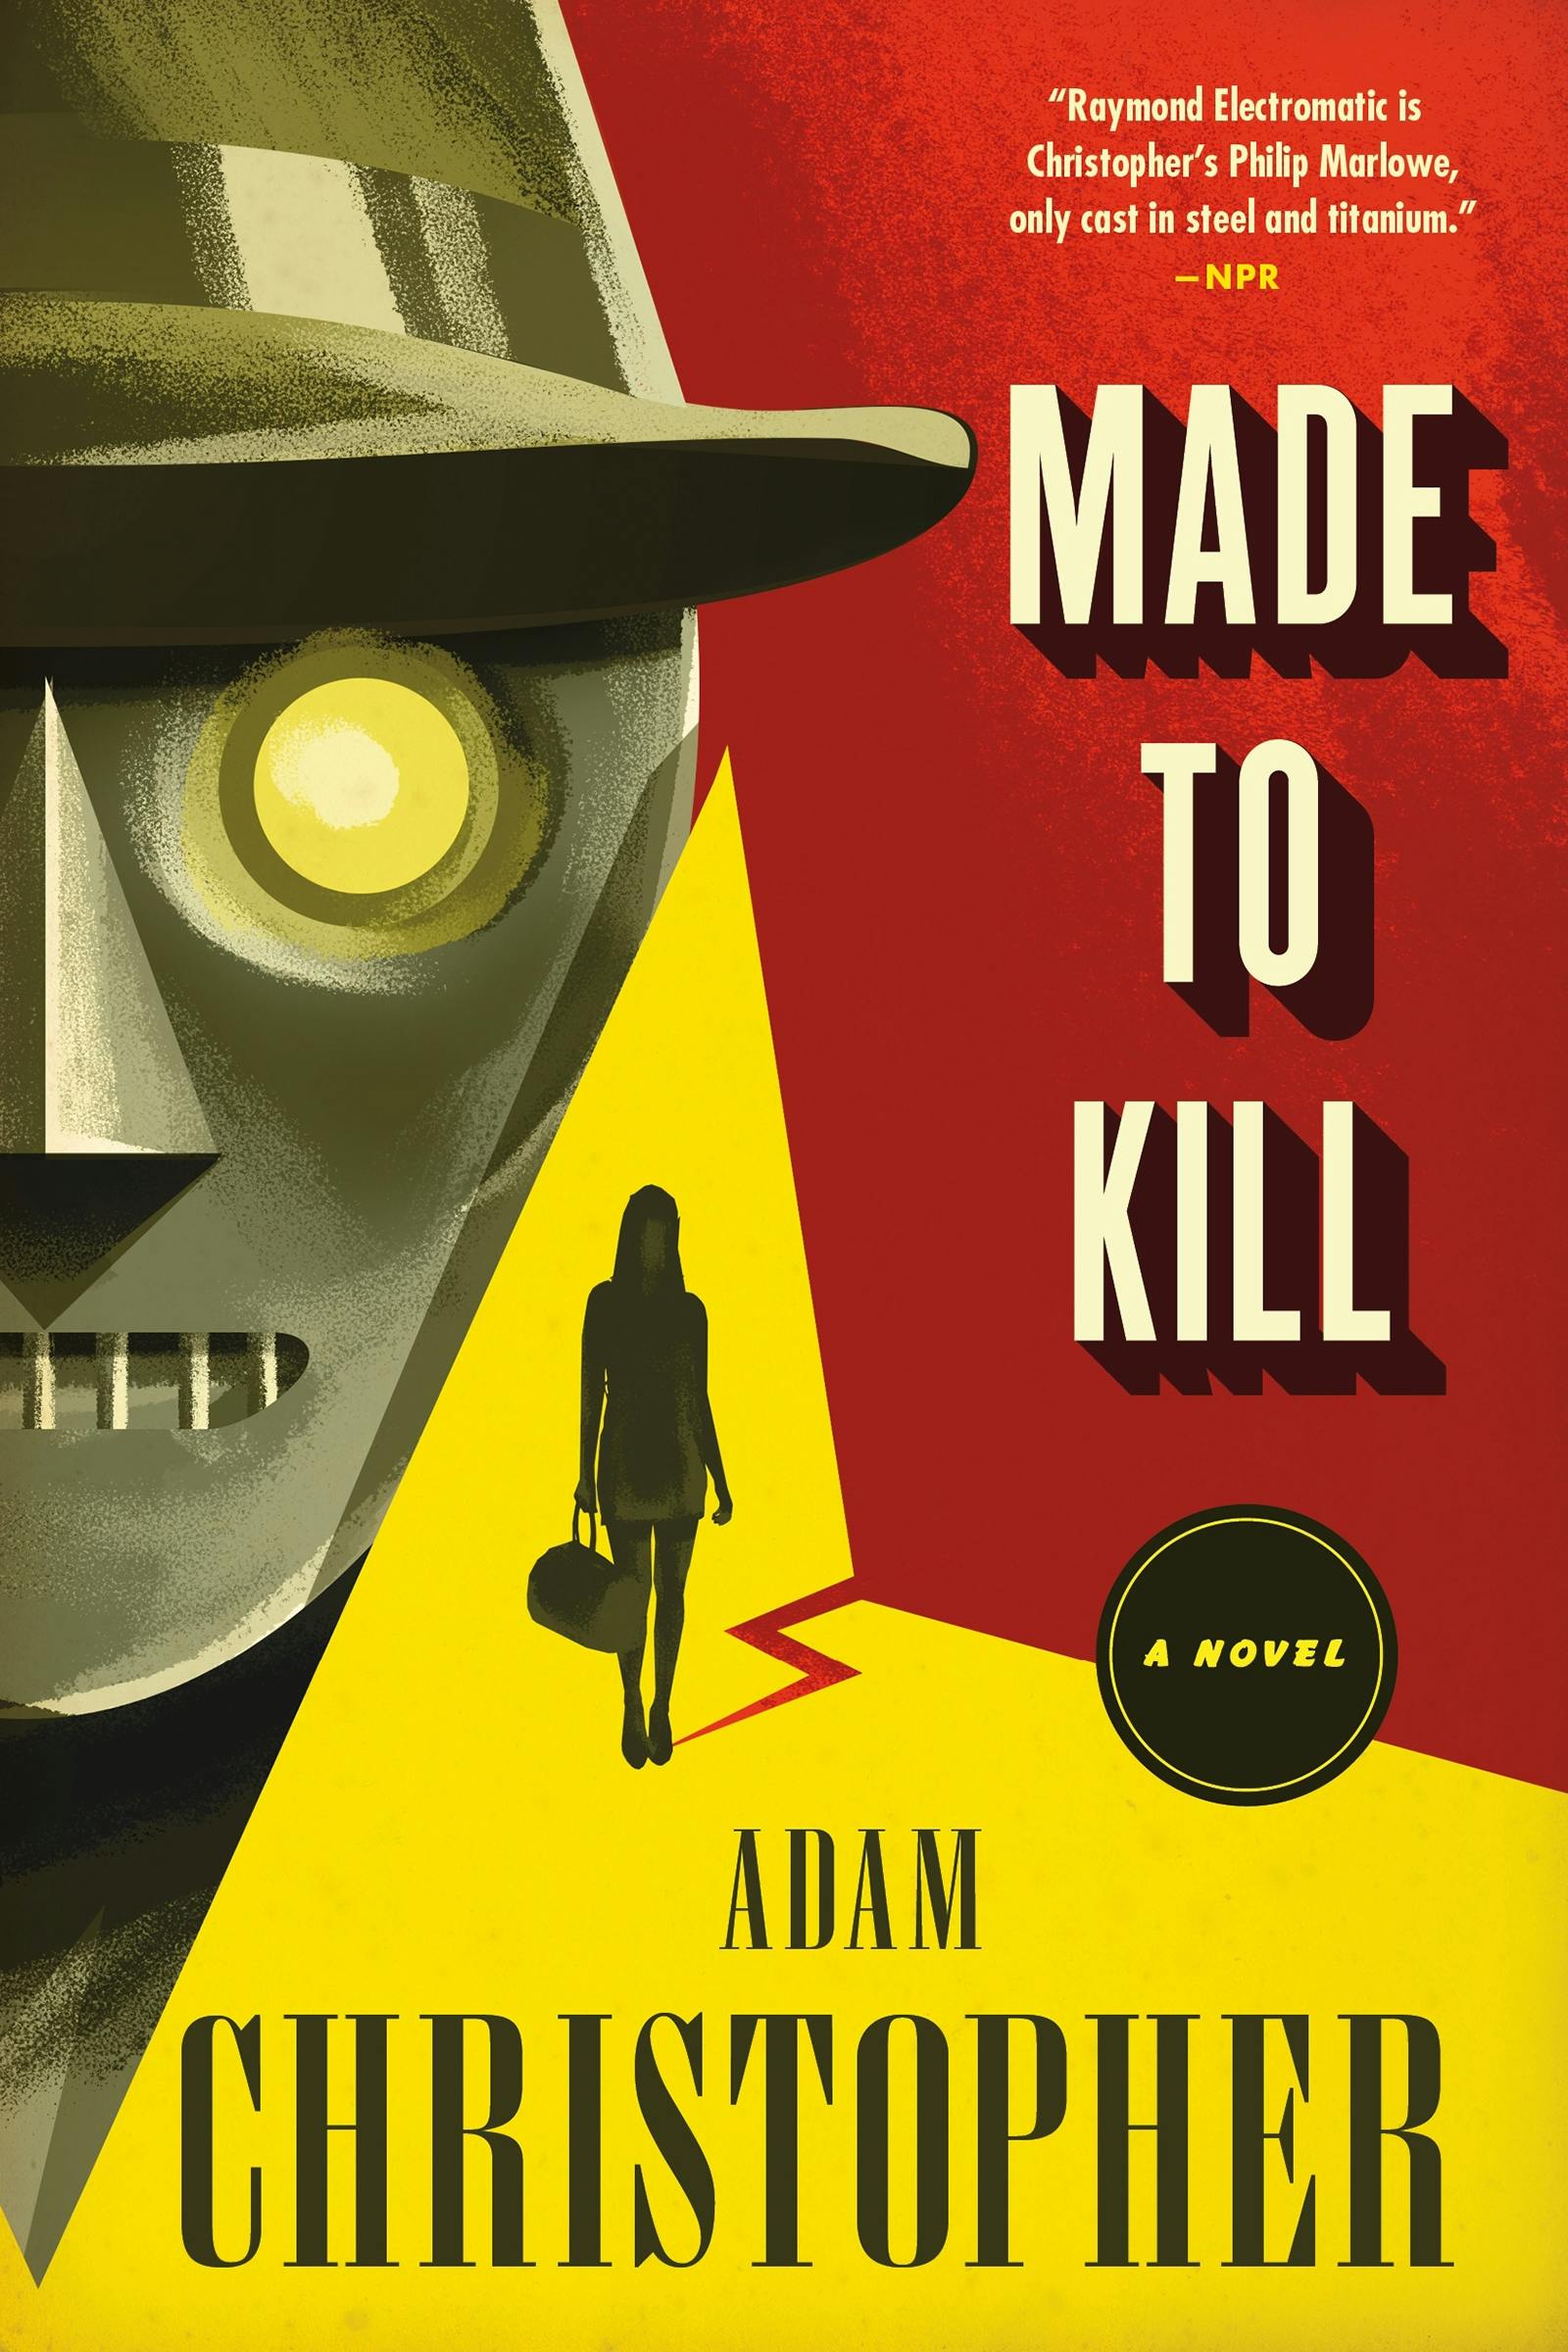 Image of Made to Kill